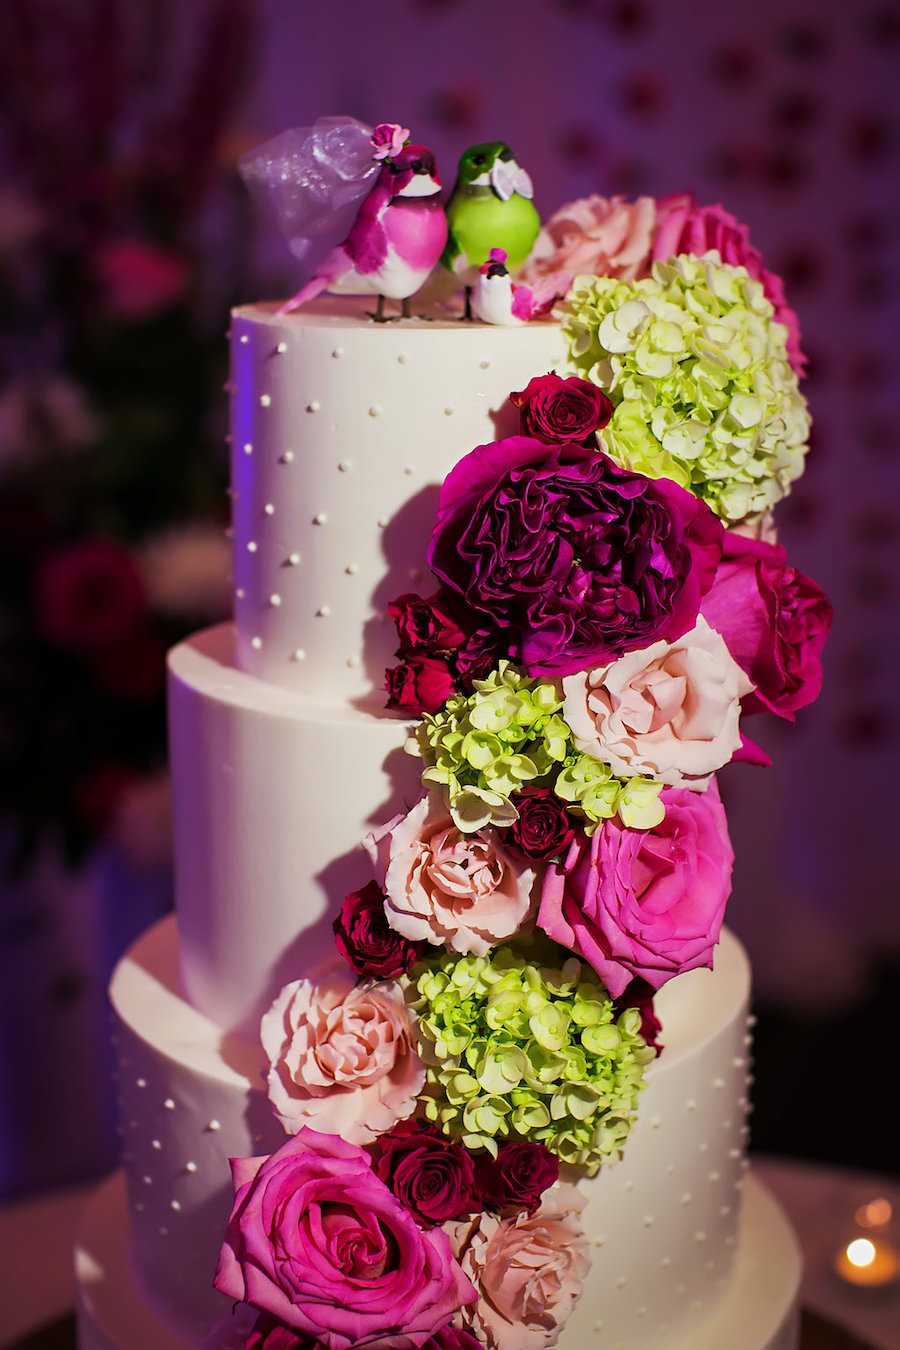 Four Tier Round White Wedding Cake with Pink and Green Roses and Hydrangea with Bird Wedding Cake Topper | Sarasota Wedding Photography by Limelight Photography